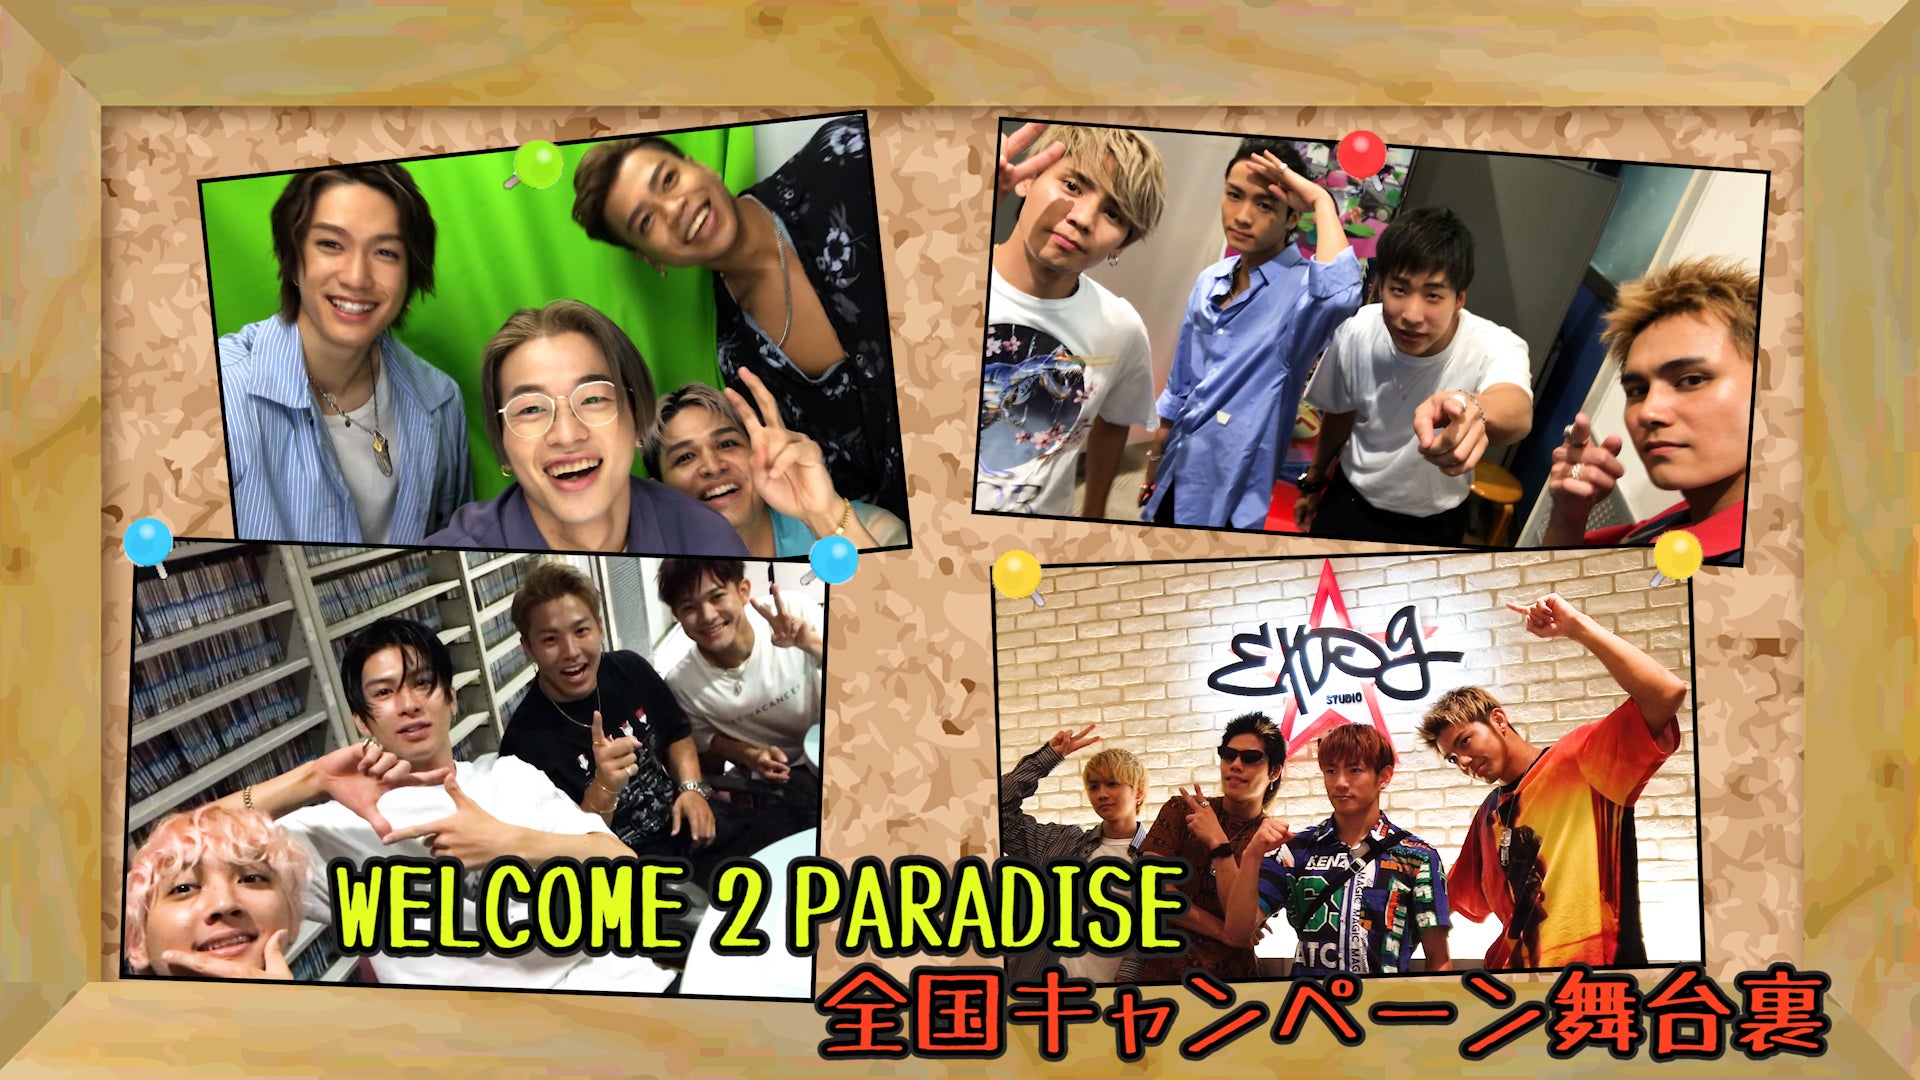 『WELCOME 2 PARADISE』全国キャンペーン舞台裏！ 2019/9/26(木)THE RAMPAGE